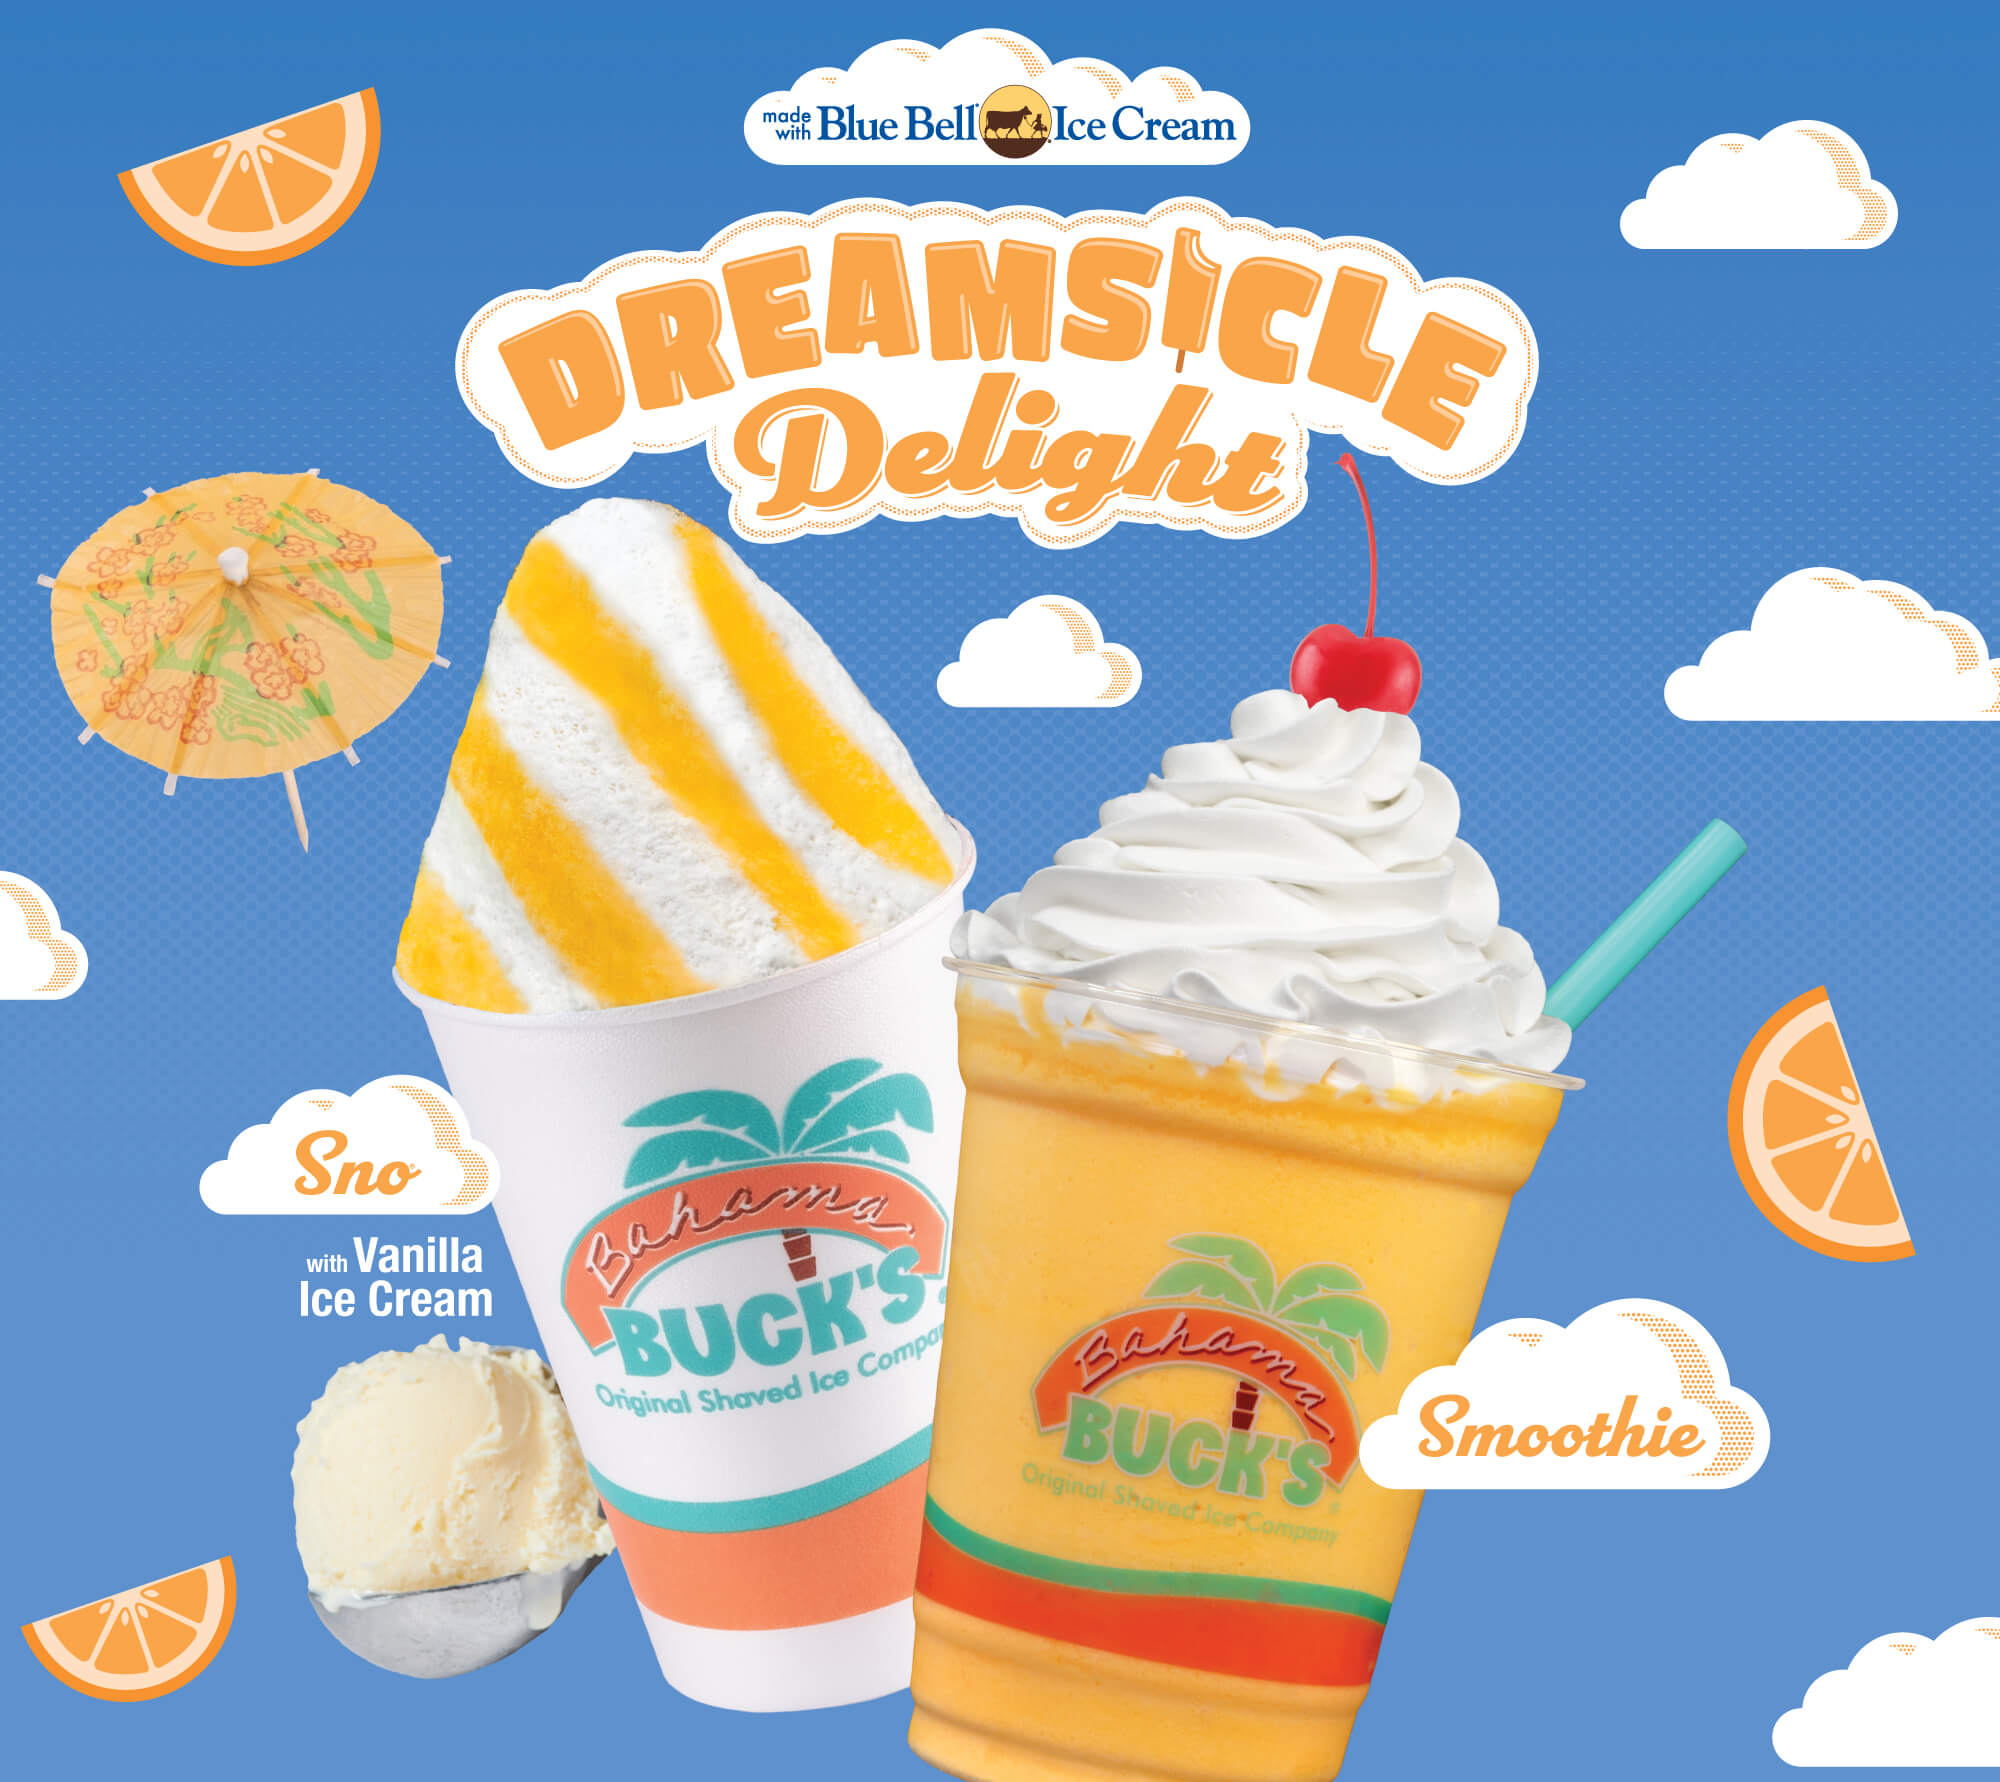 Dreamsicle Delight Sno and Smoothie Promo